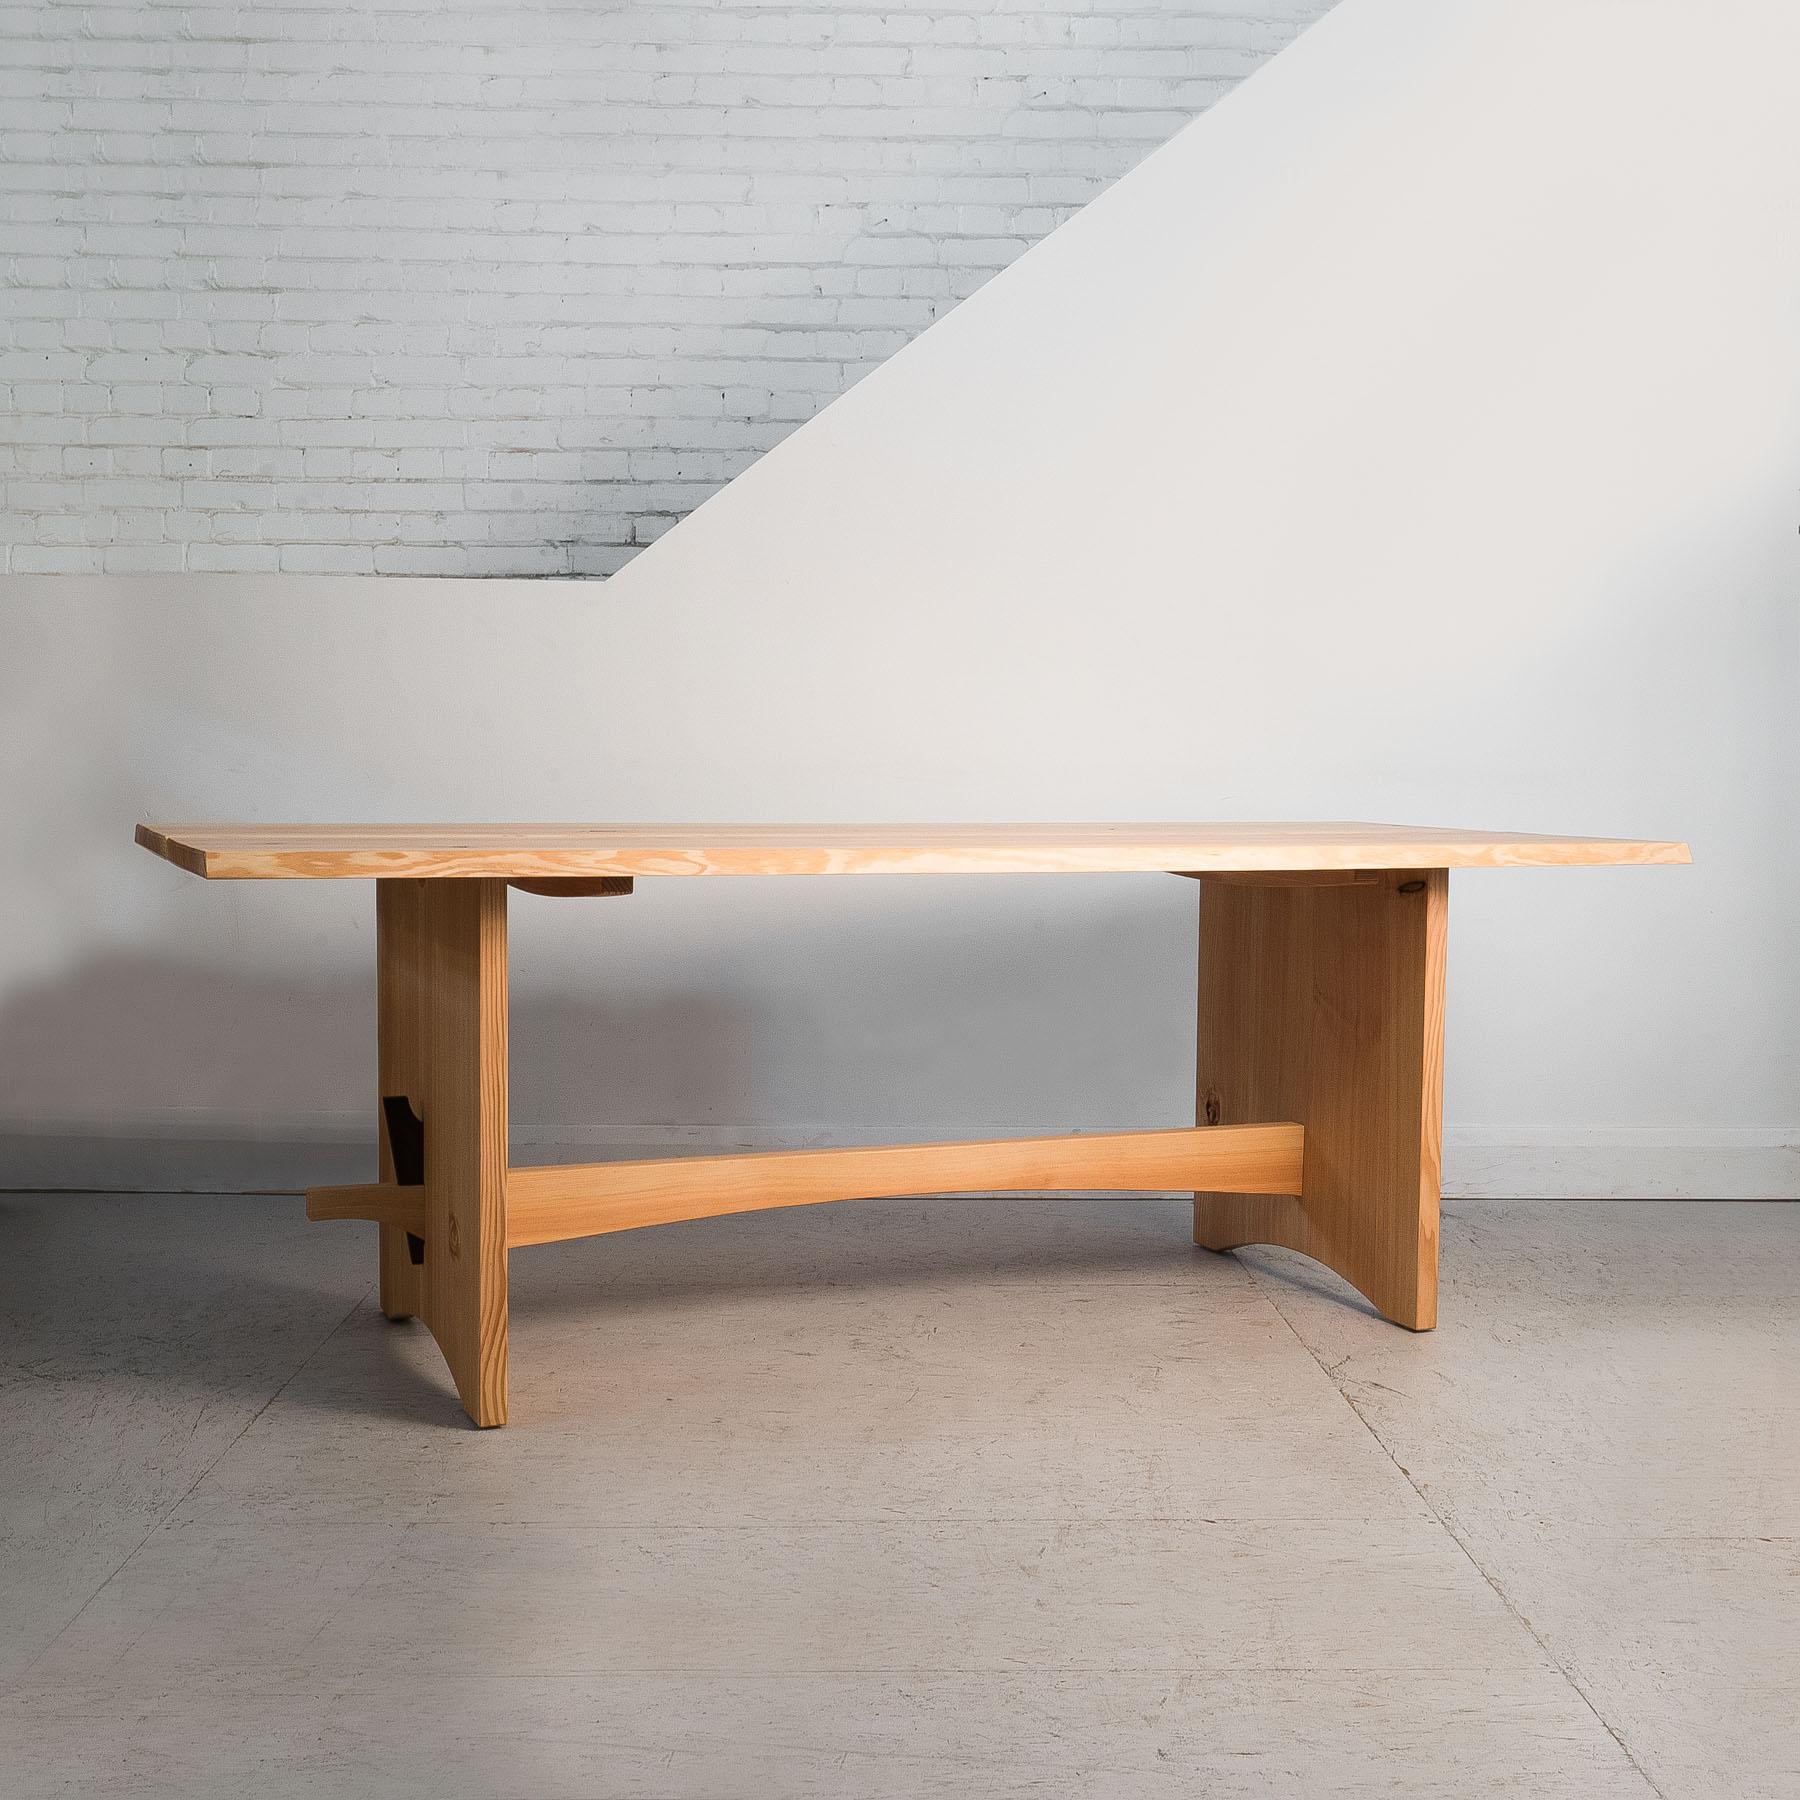 Full of unique character and natural beauty, the Simard dining table features a split tabletop with waney edge detailing. 

The simple structure is designed to be assembled with a mallet and nothing else. The bottom rail which passes through the